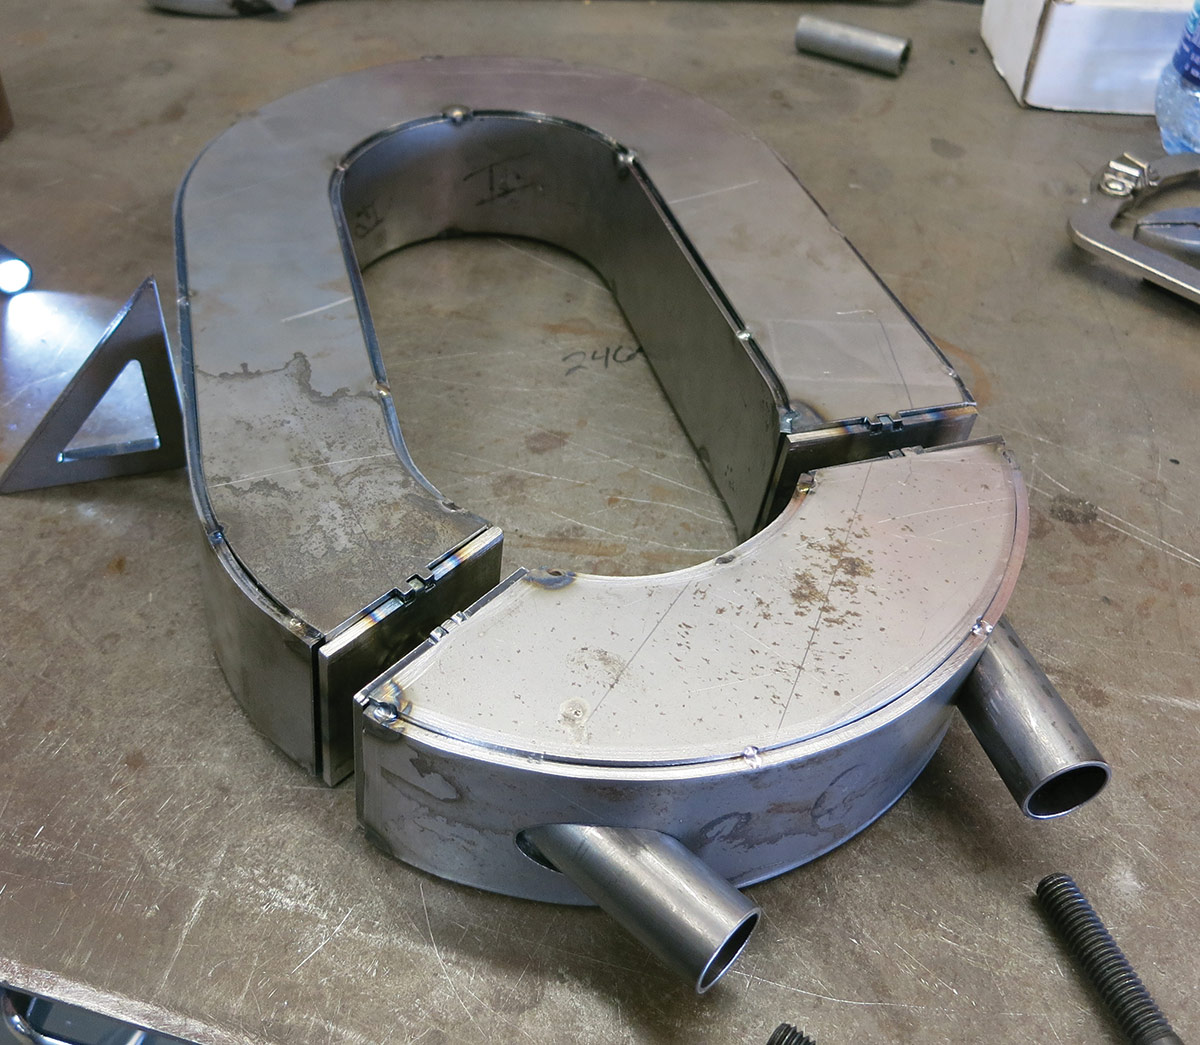 Rather than a simple C-notch, the rear of the frame was modified with a two-piece hoop on each side. The bottoms of the hoops are removeable to allow the rearend to drop out if necessary.